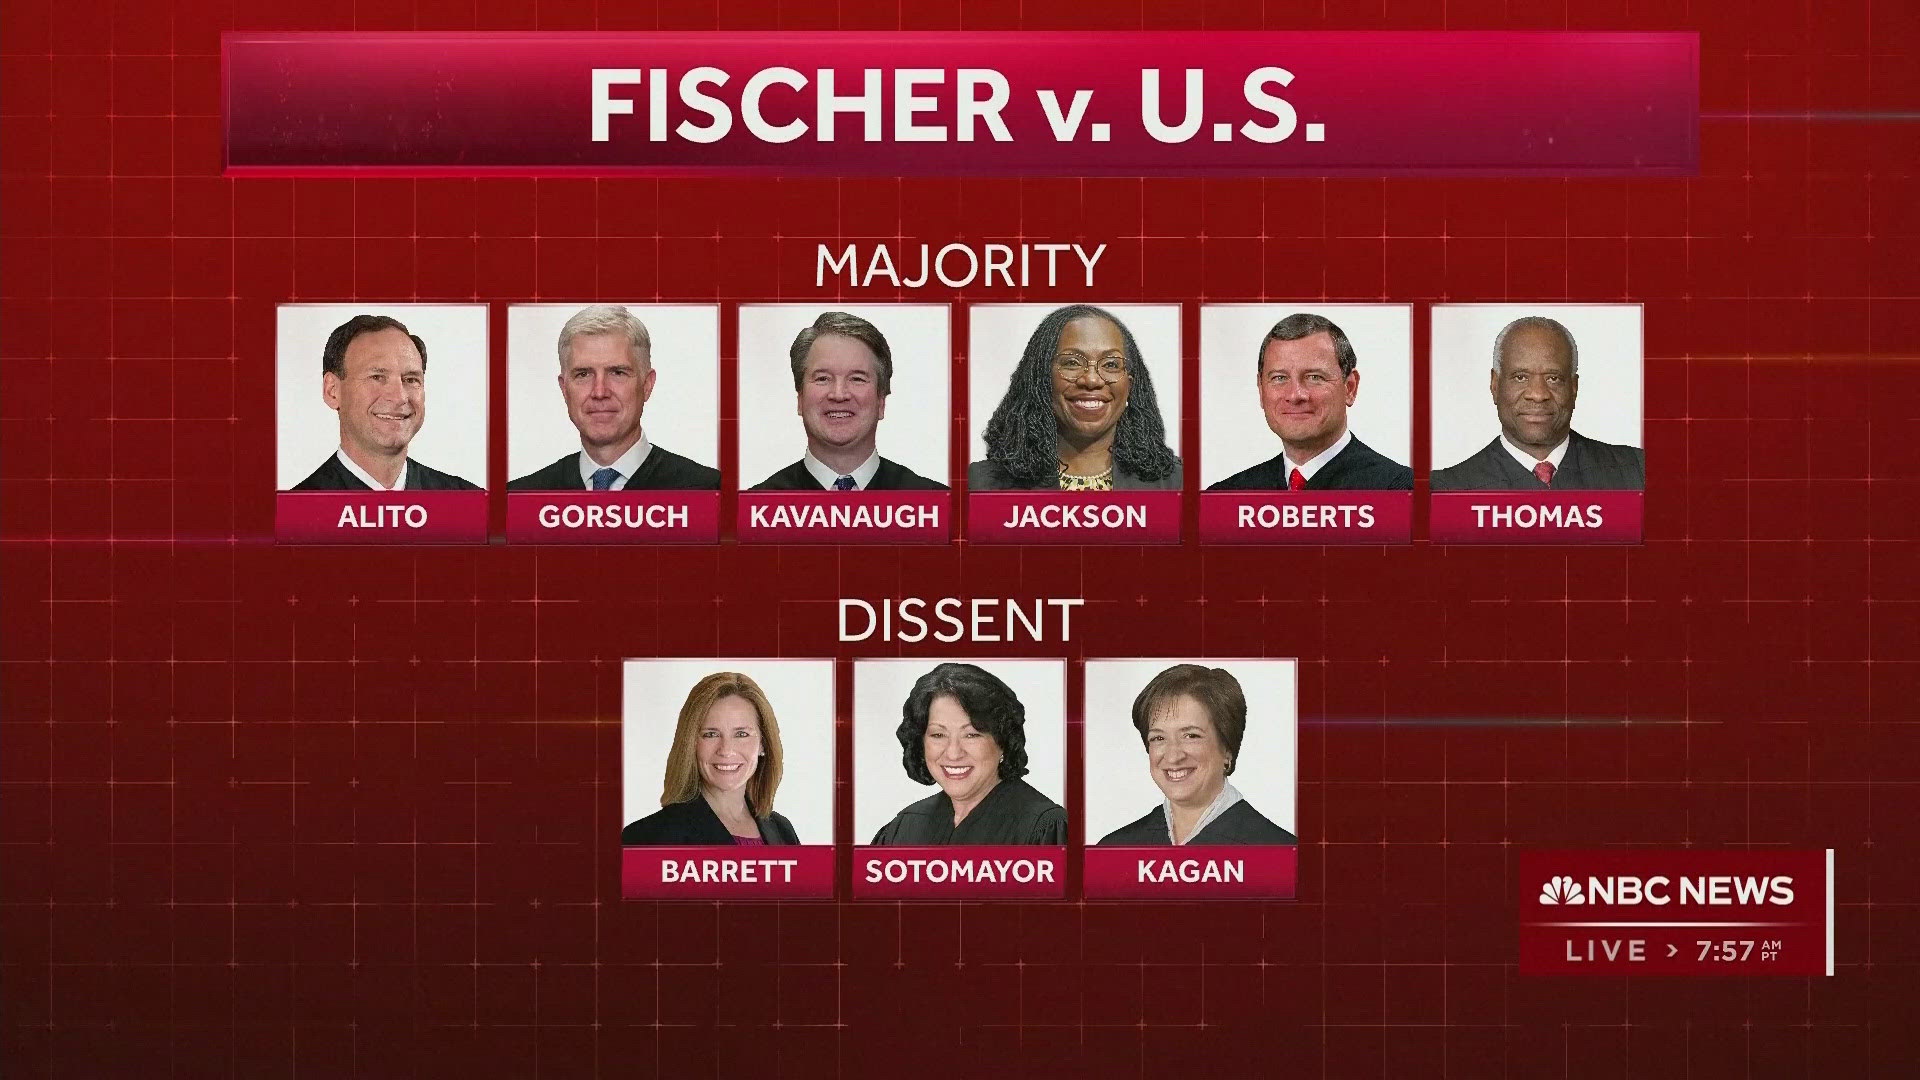 In a 6-3 vote, the Justices sided with defendant Joseph Fischer.